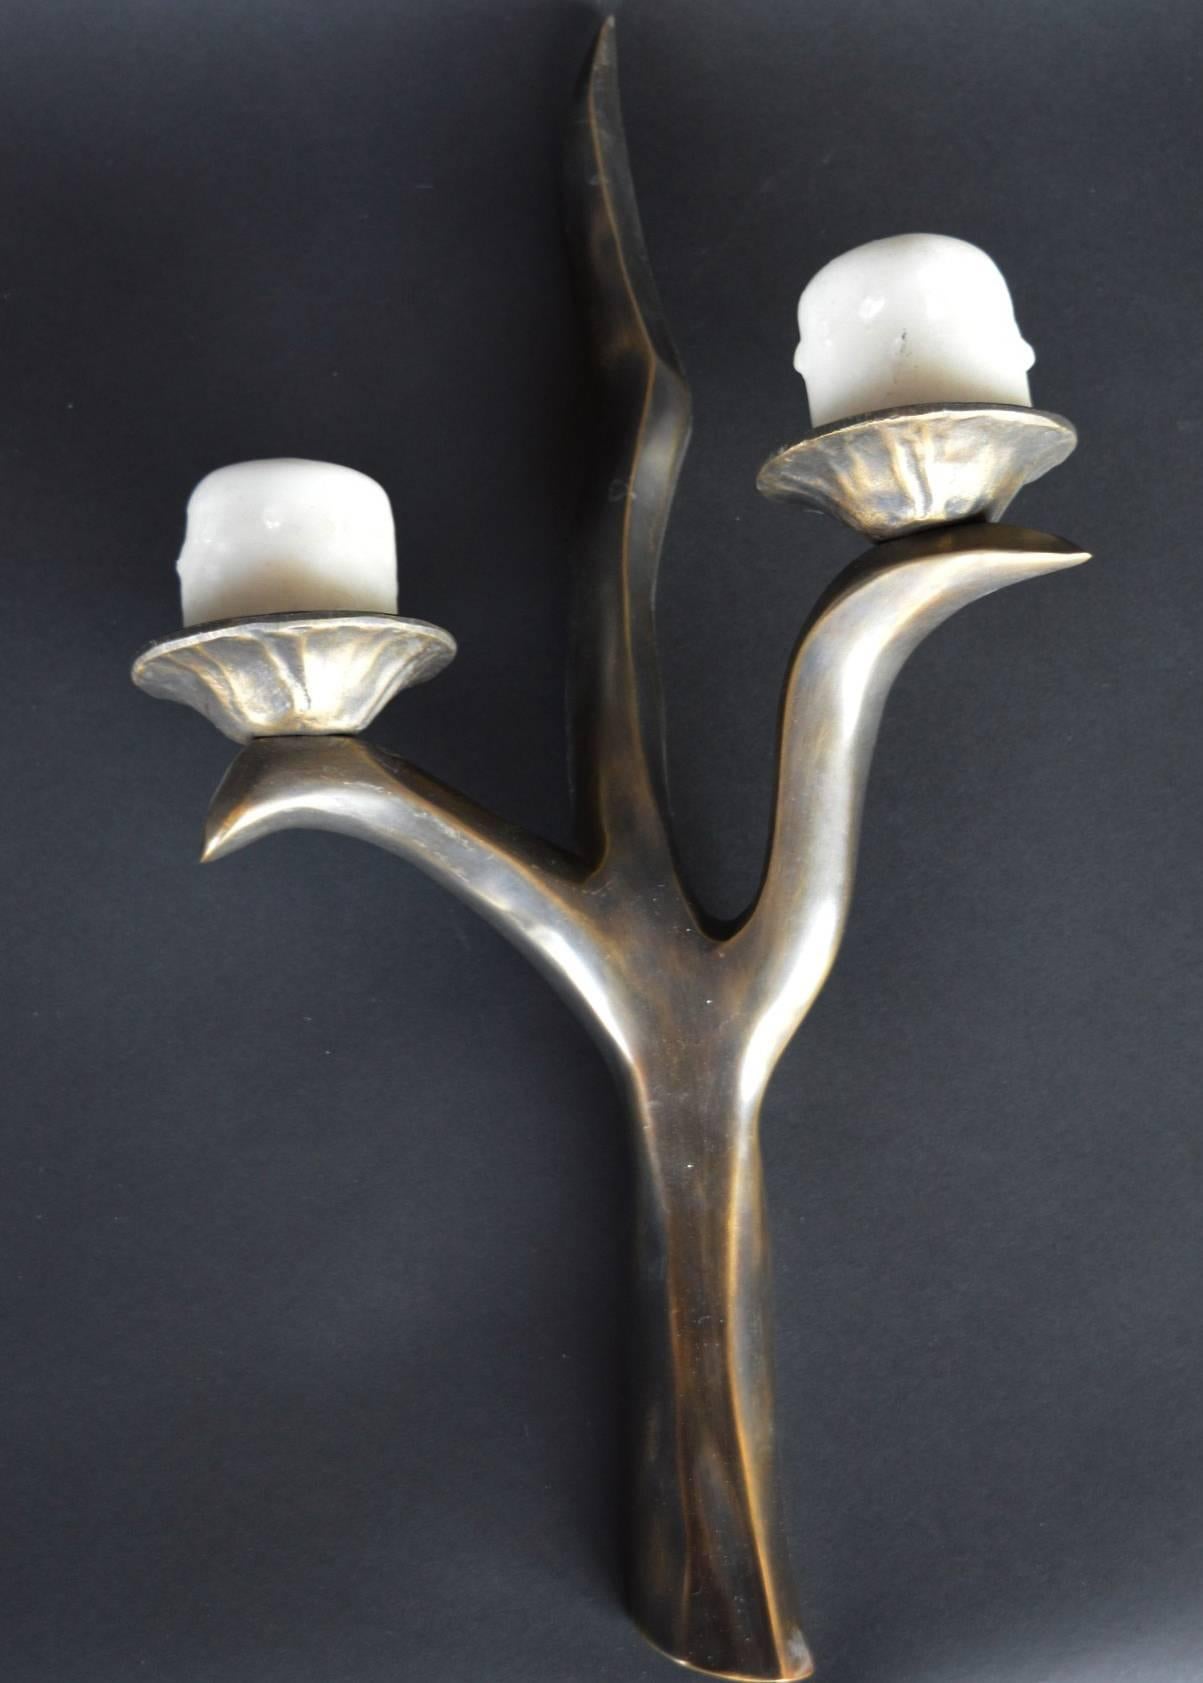 Set of three solid bronze sconces. Sconces look like branches holding lily pads.